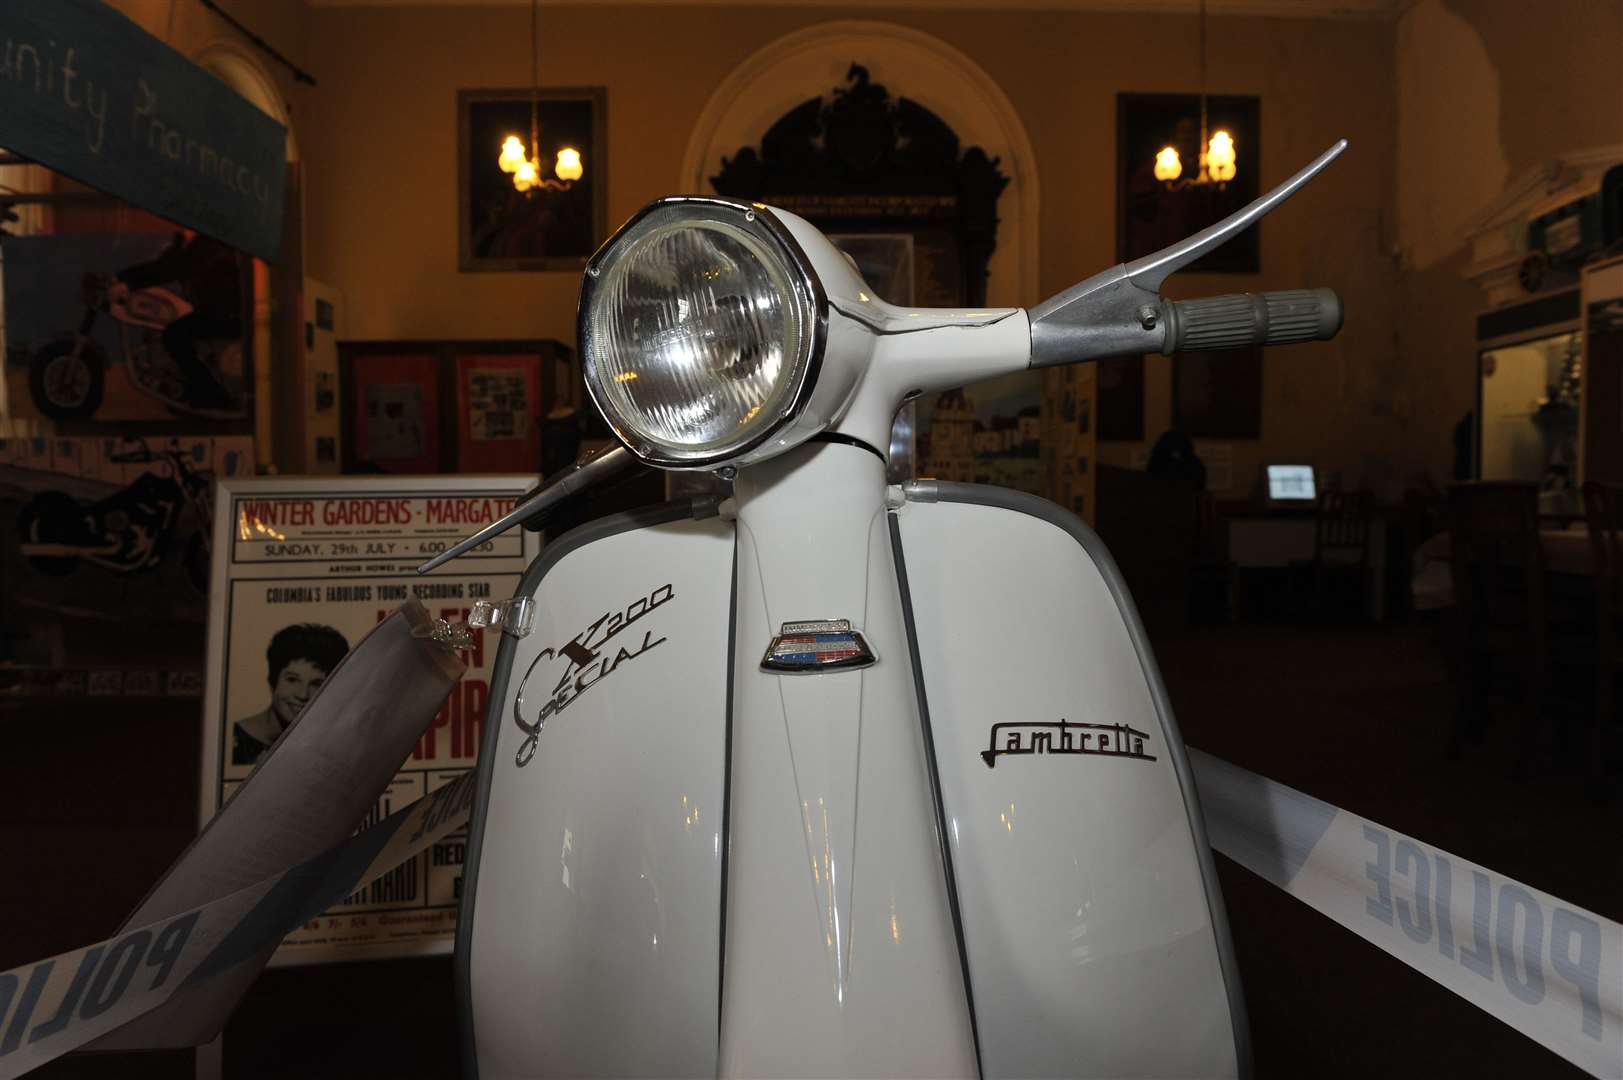 The scooter was the preferred transport of the Mod of the 1960s